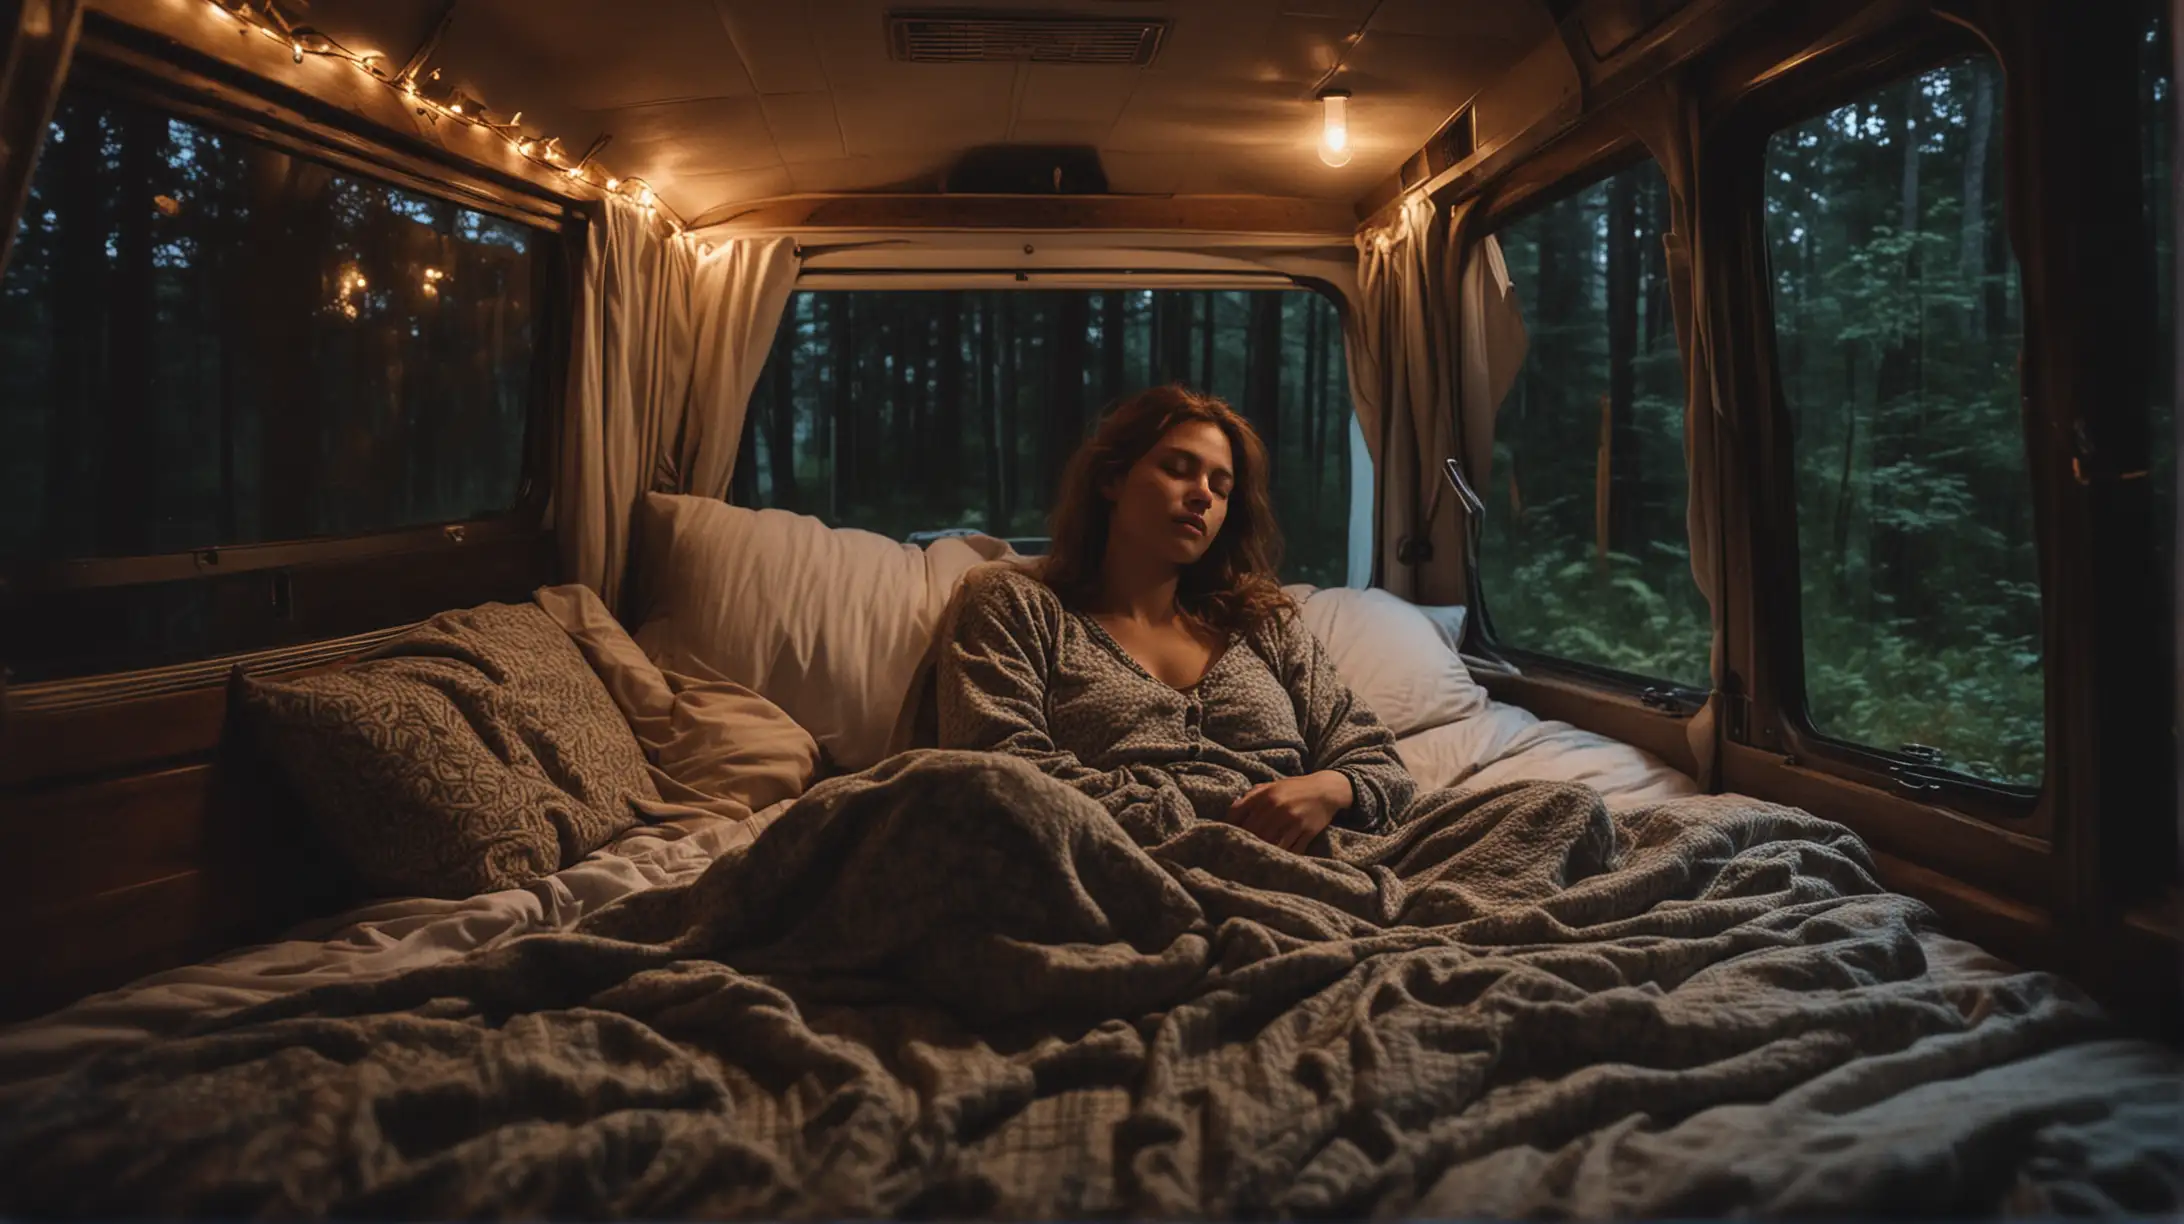 Woman Peacefully Sleeping in Camper Van at Night with Forest View